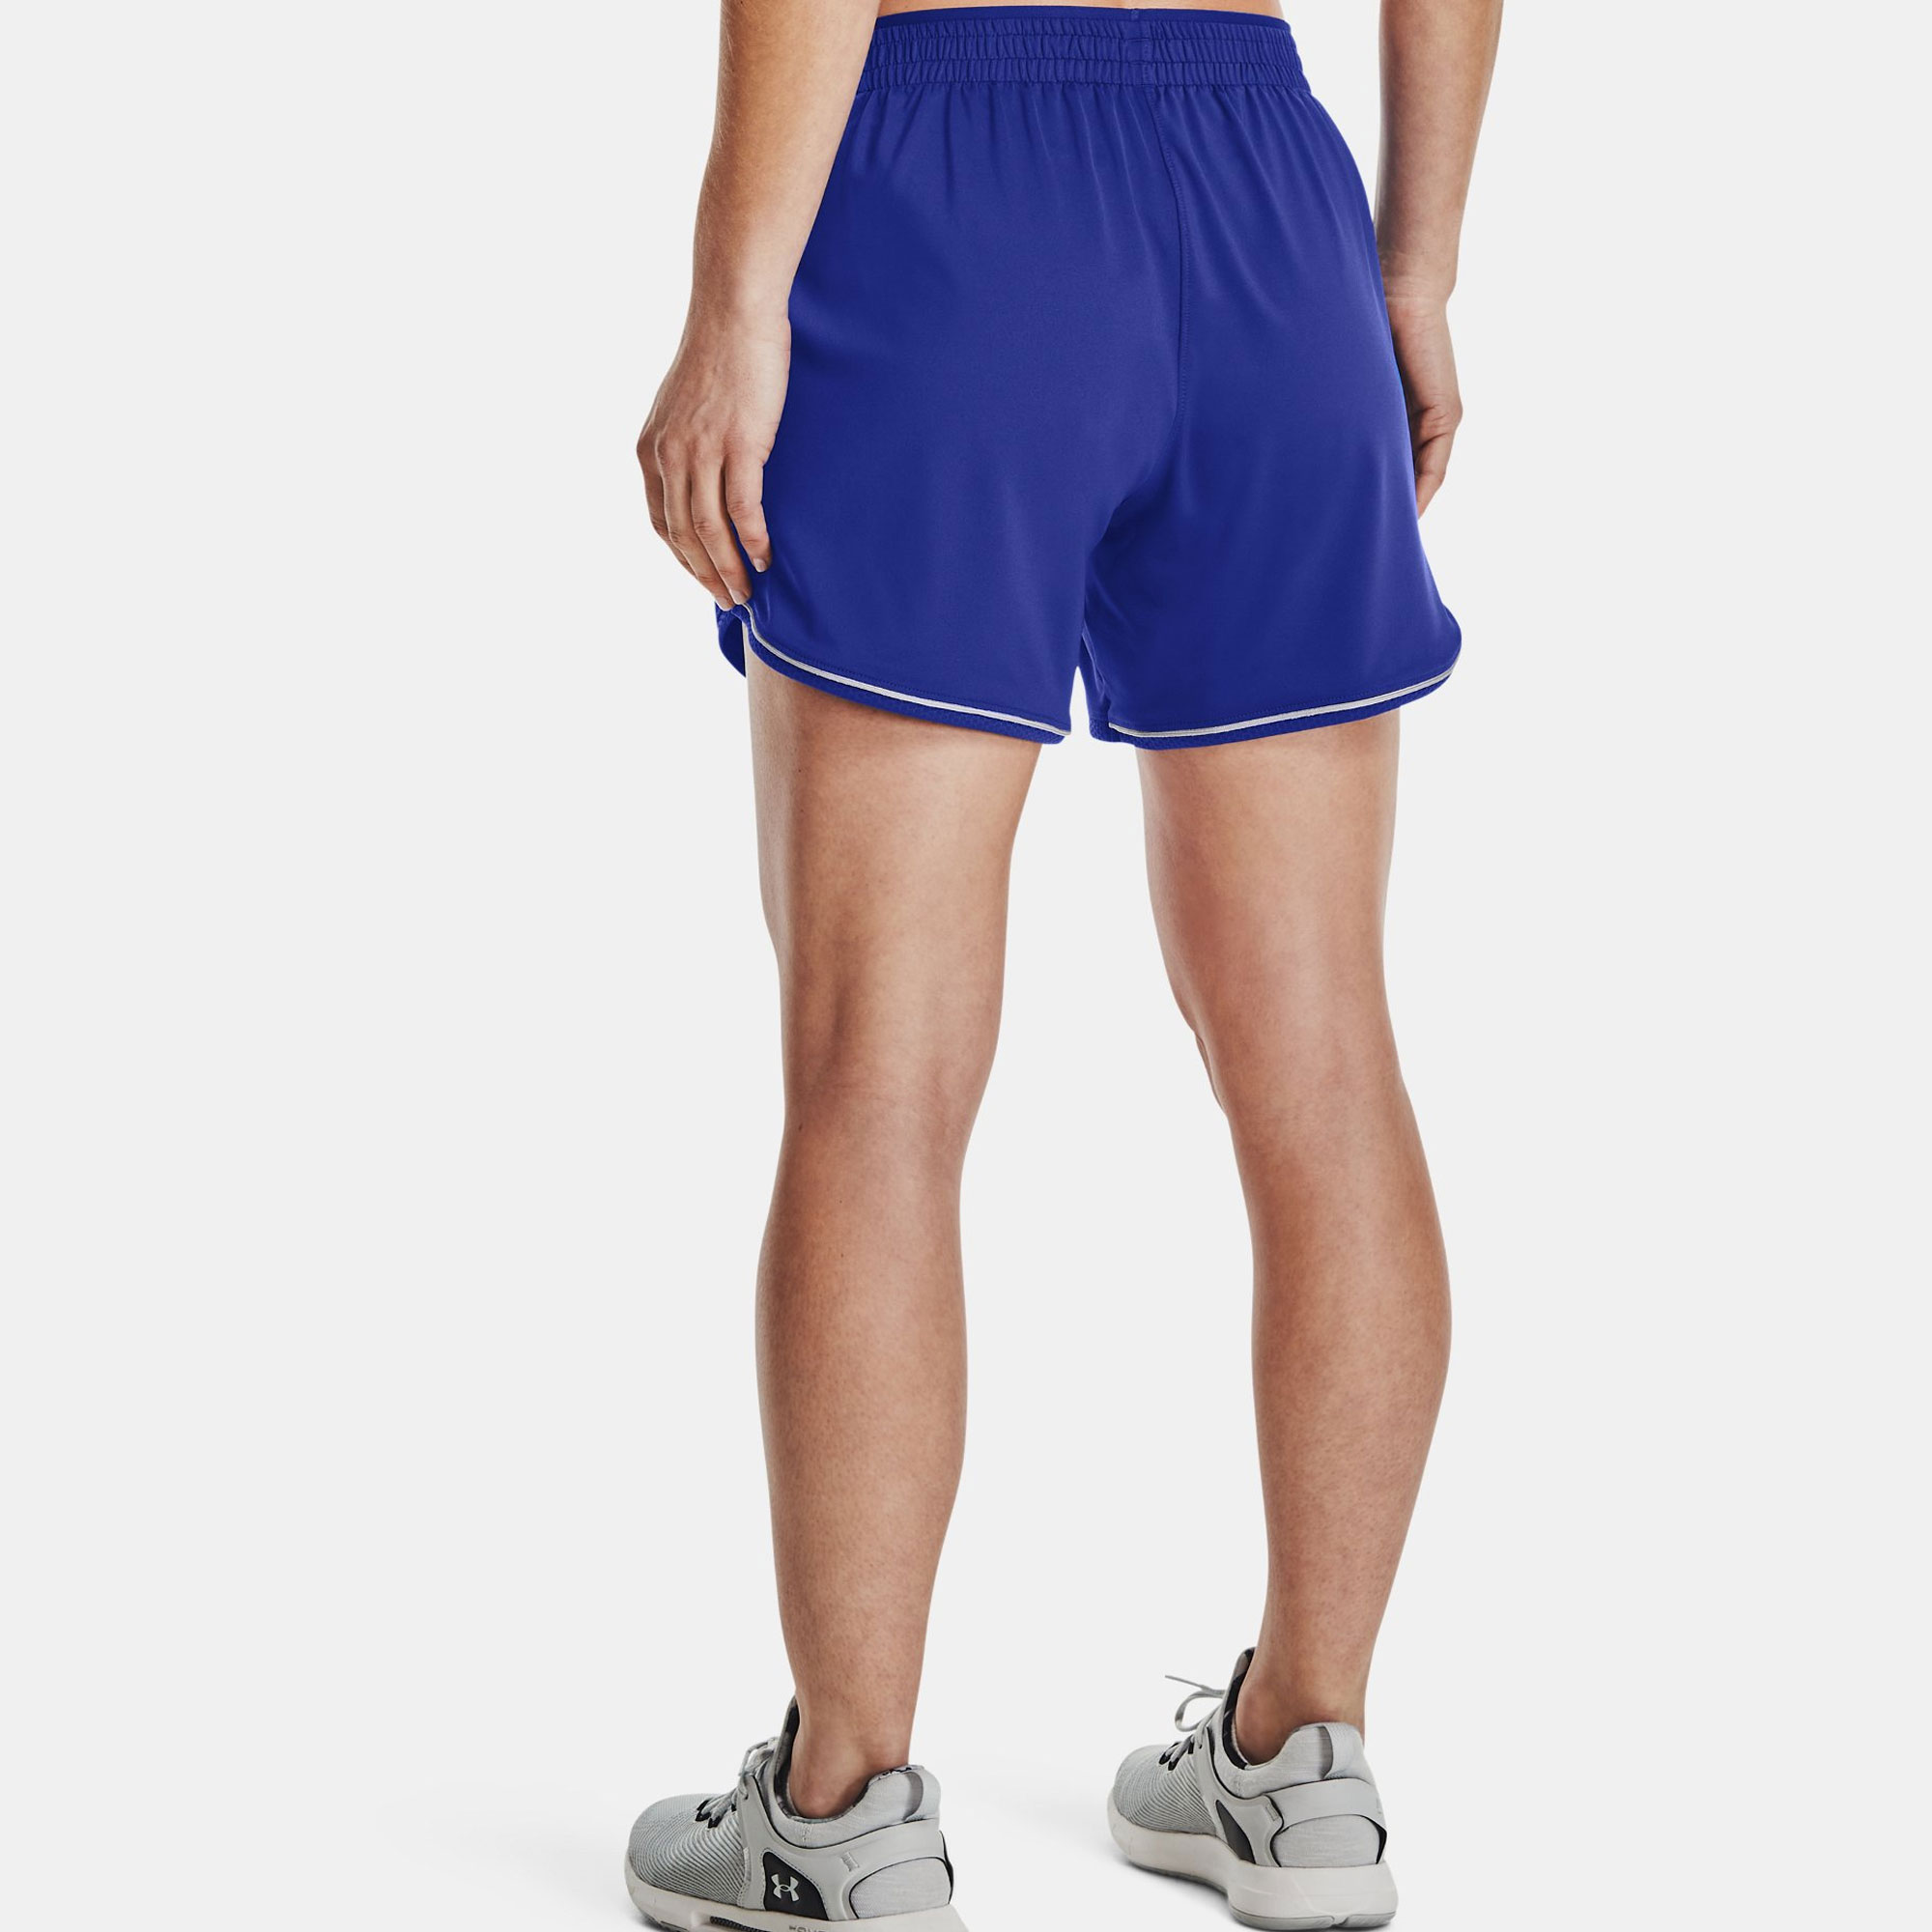 Under Armour Women's Knit Shorts 1360762